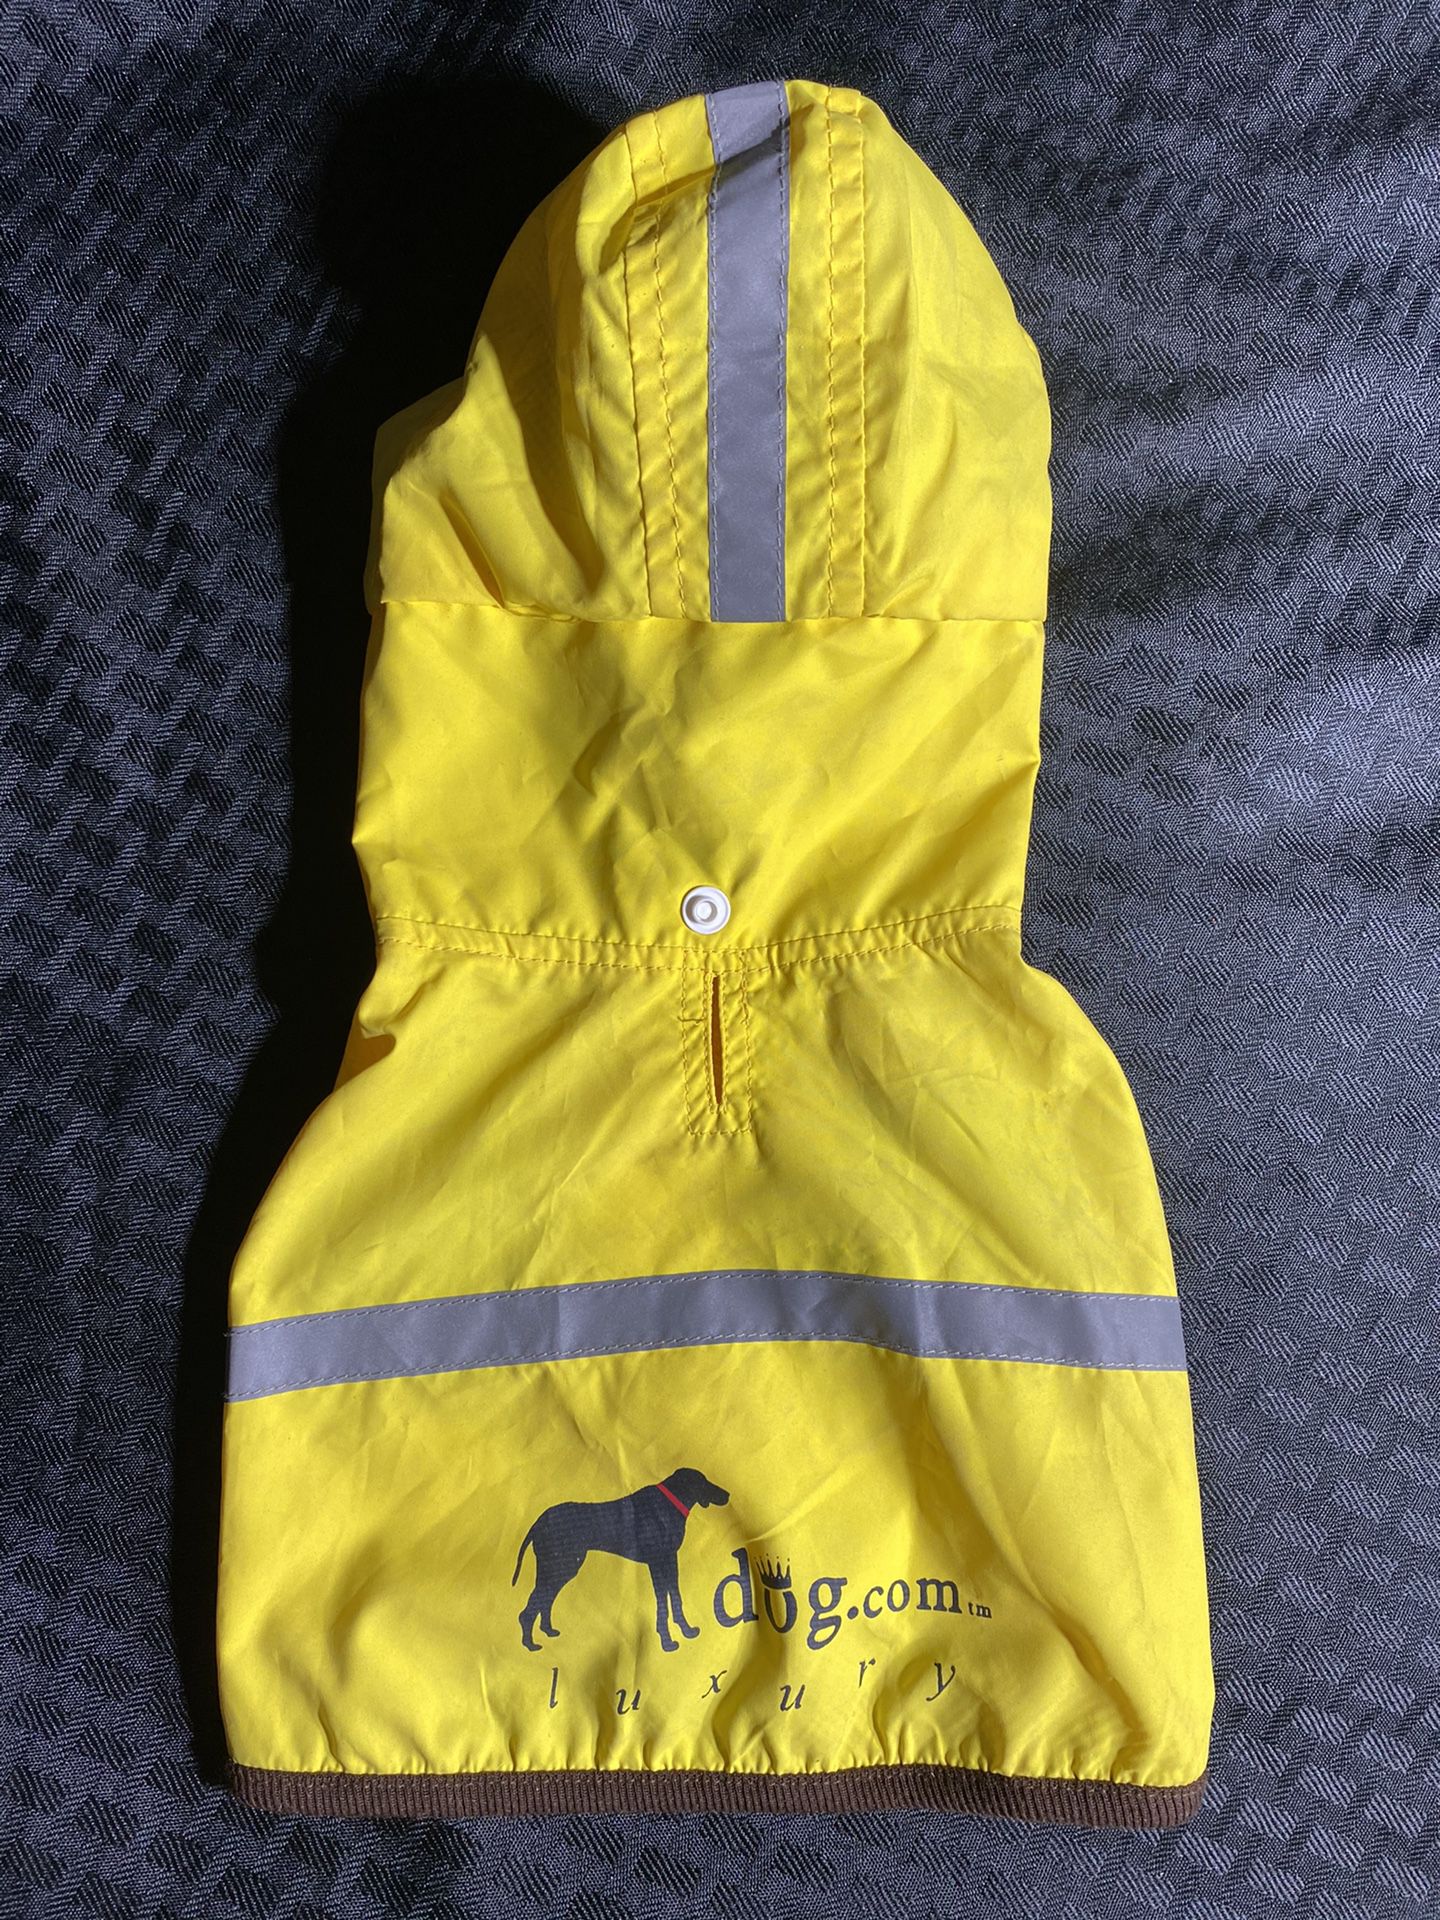 Pet Raincoat by https://offerup.com/redirect/?o=RG9nLmNvbQ== (Small, Yellow Or Red)